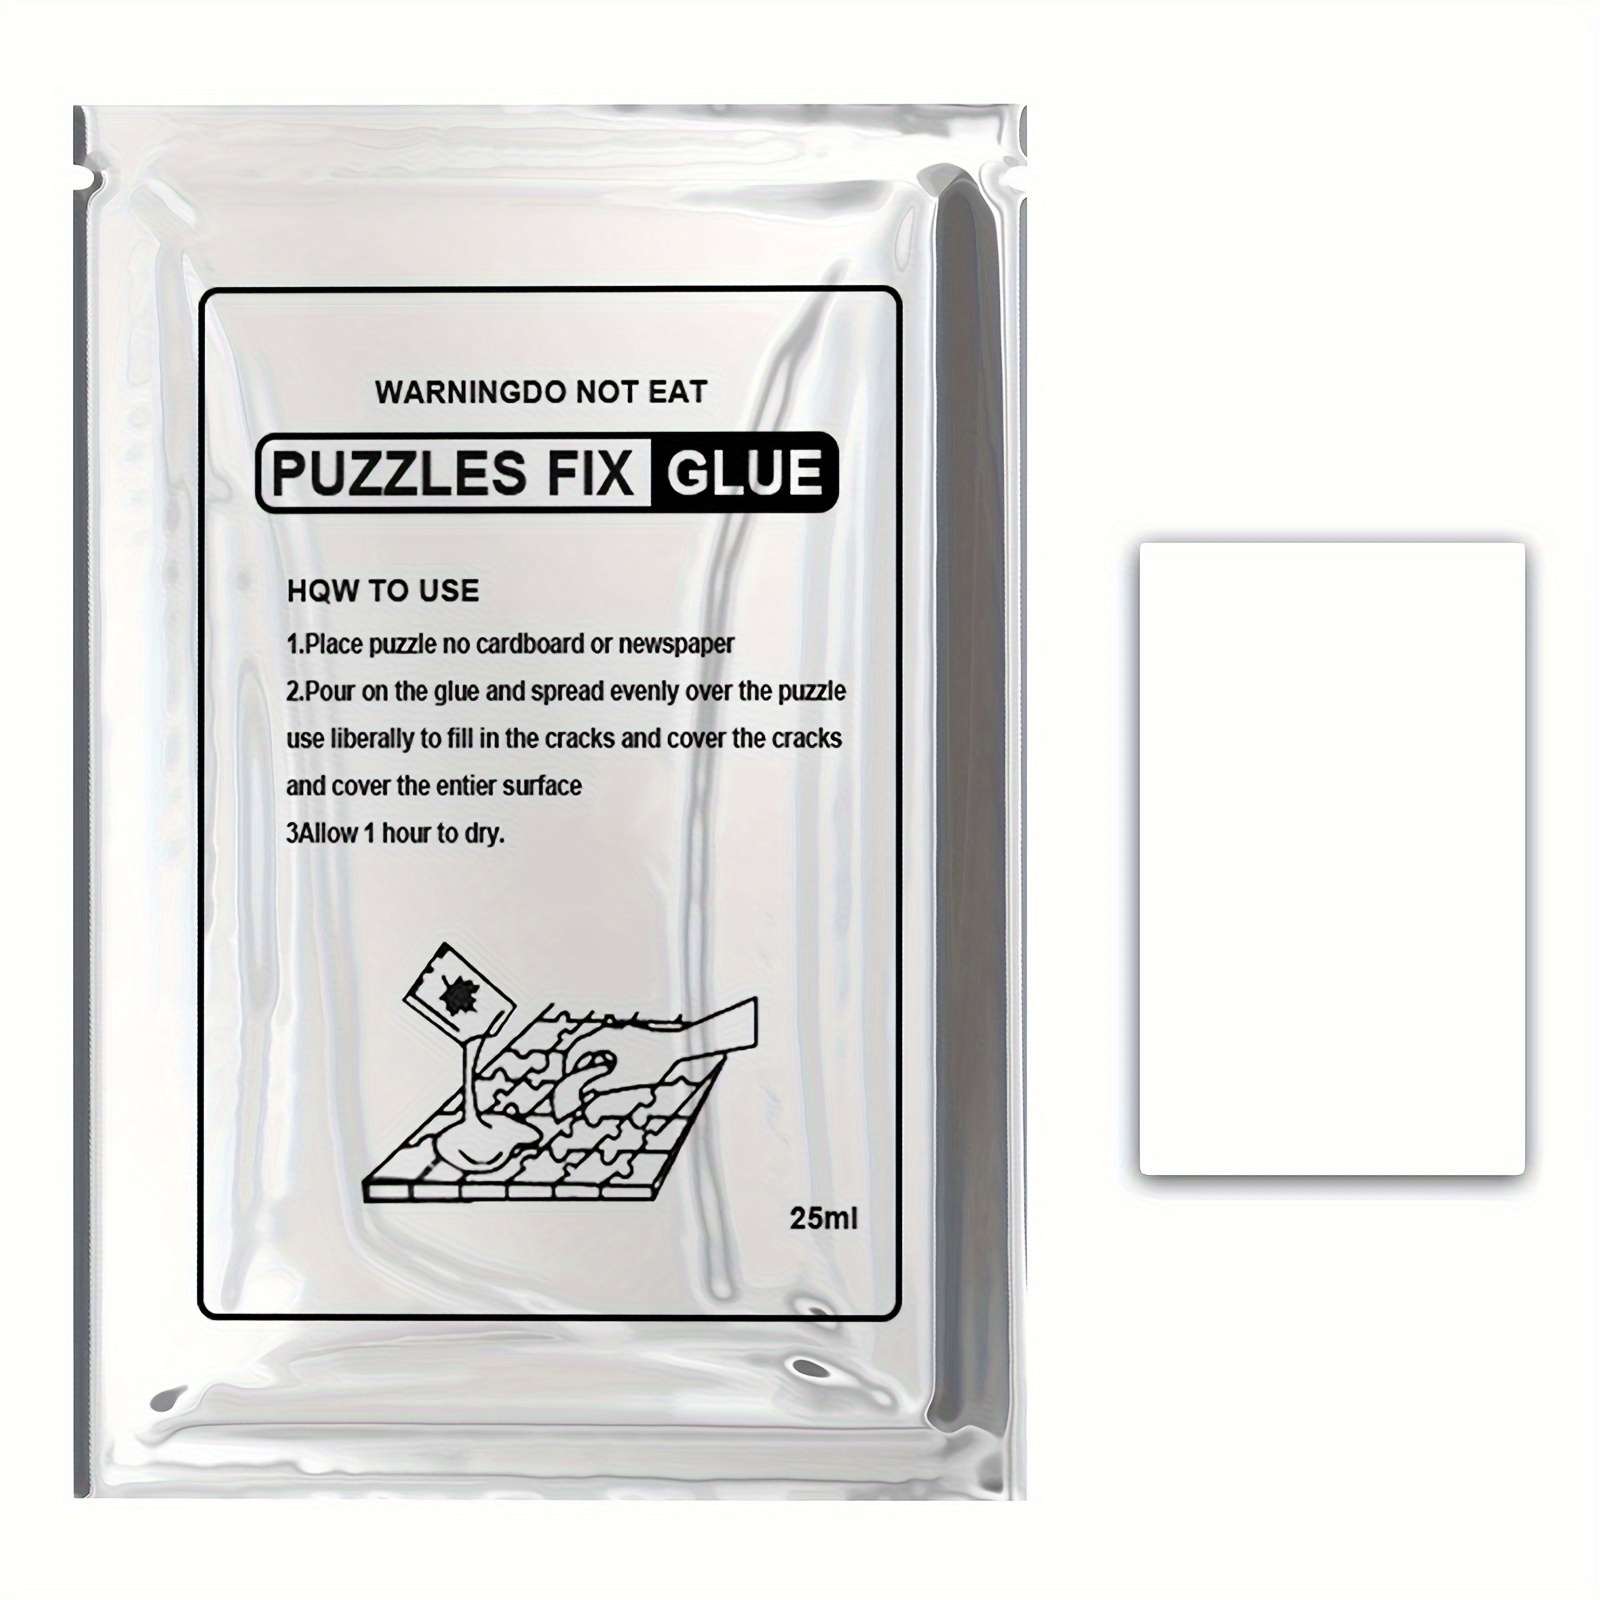 Puzzle Glue - 240 ml Puzzle Glue with Sponge Head, Puzzle Glue Clear Firm Hold of Your 1000/1500/3000 Puzzle for Paper and Wood, Water-Soluble